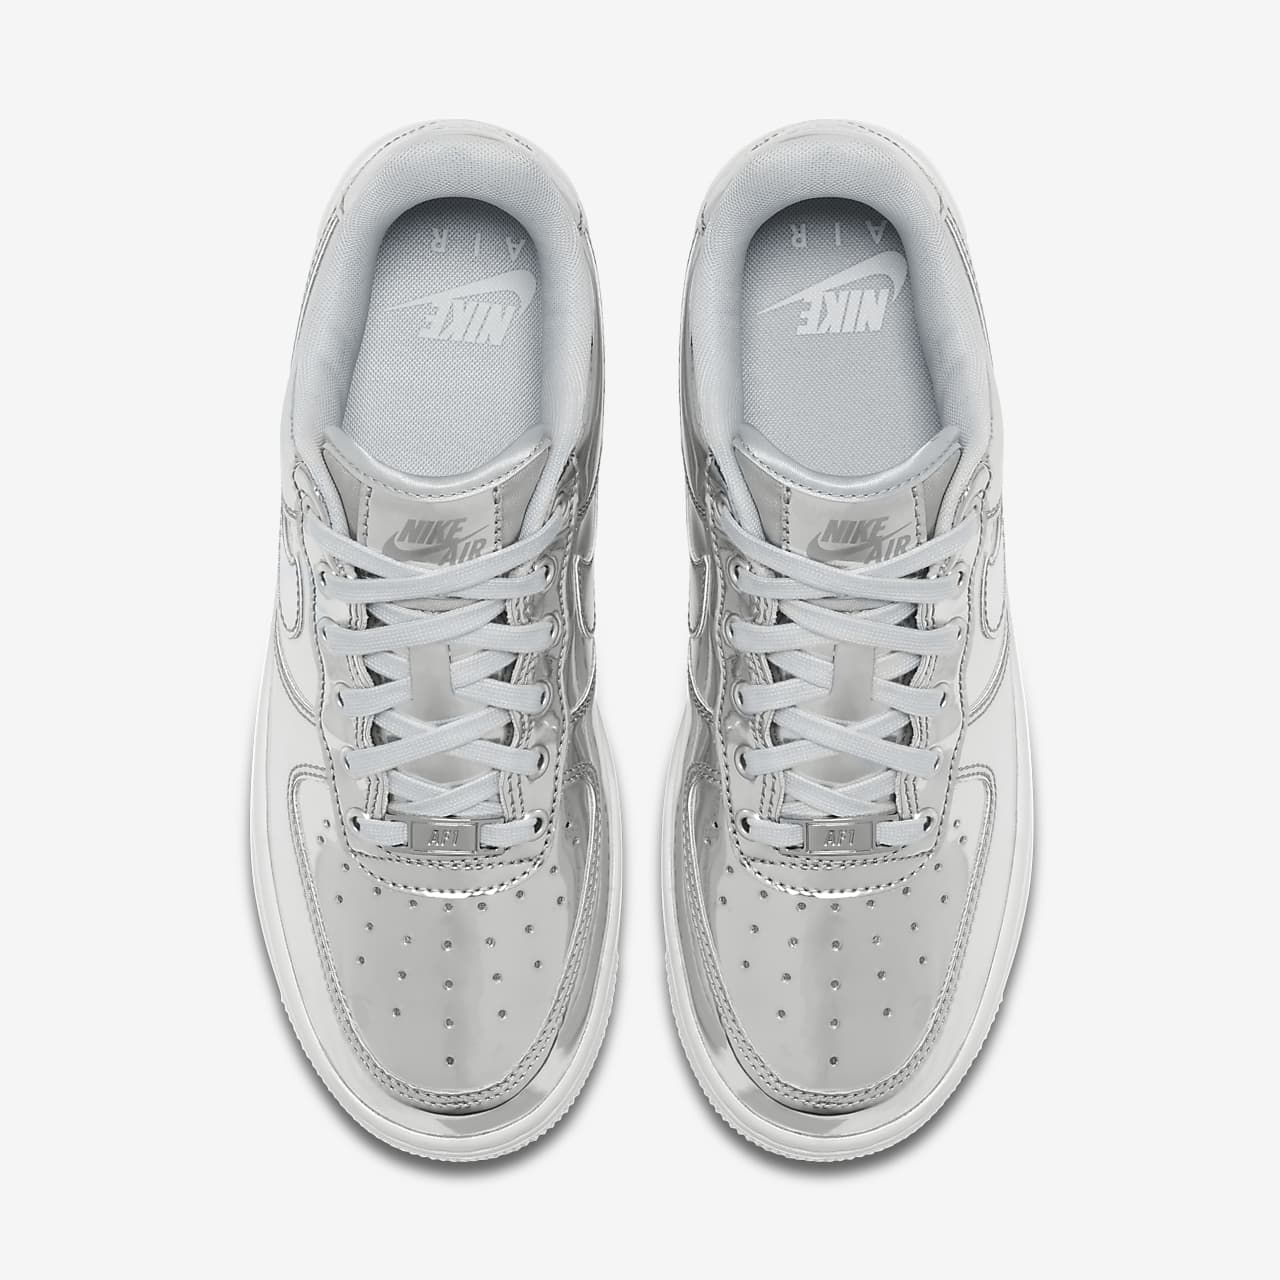 nike air force 1 sp silver